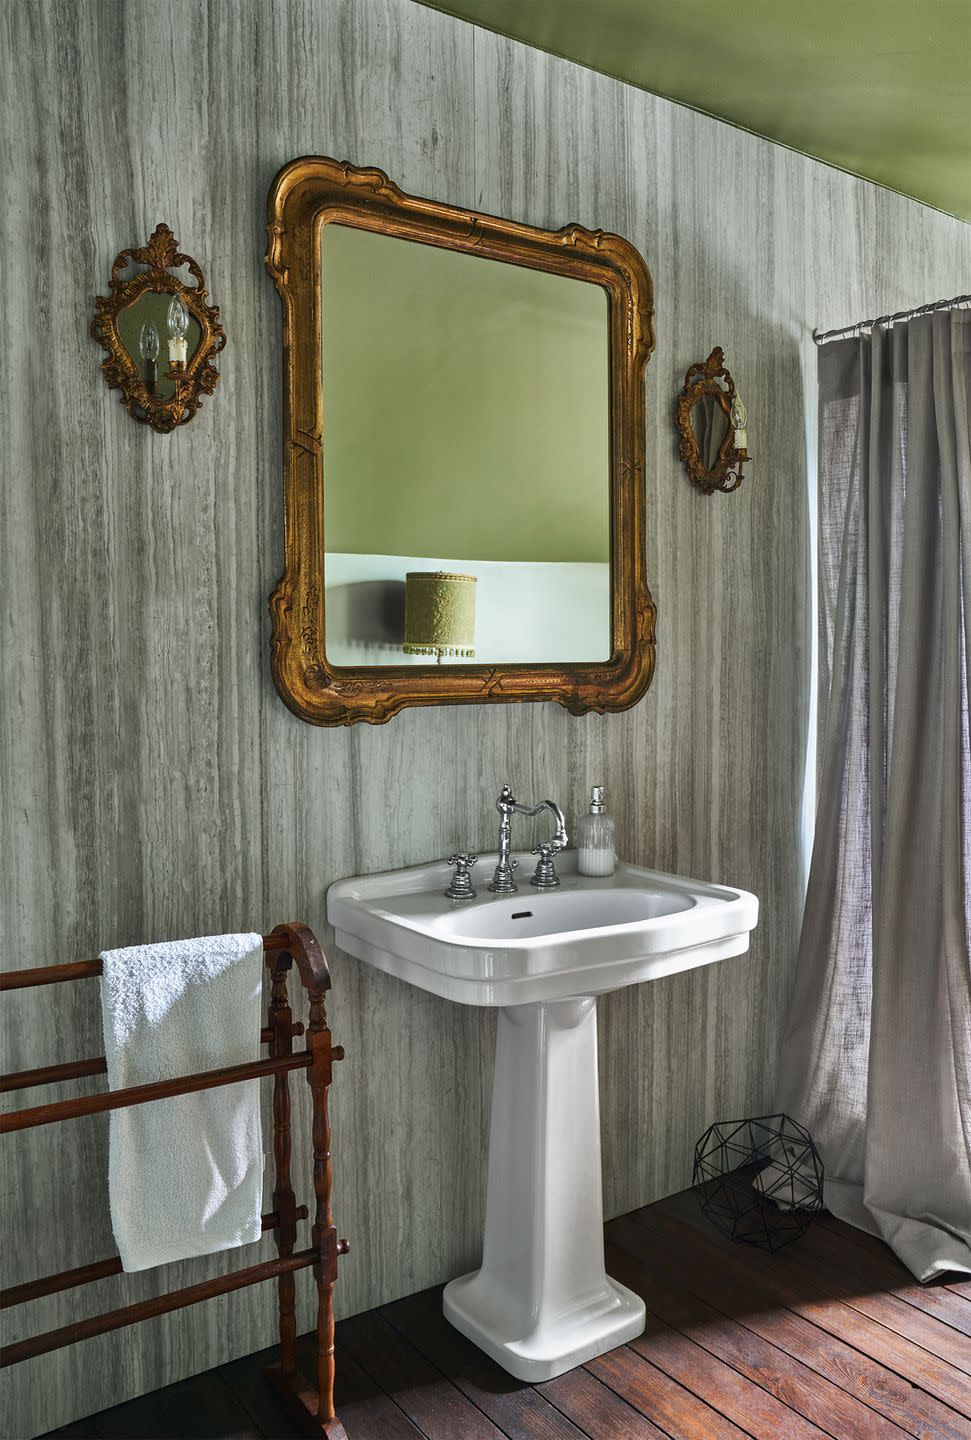 in a bathroom the walls are travertine covered, wooden drying rack with a towel, pedestal sink with silver fittings, antique mirror and two sconces above sink, linen shower curtain, slat wood floor, green ceiling